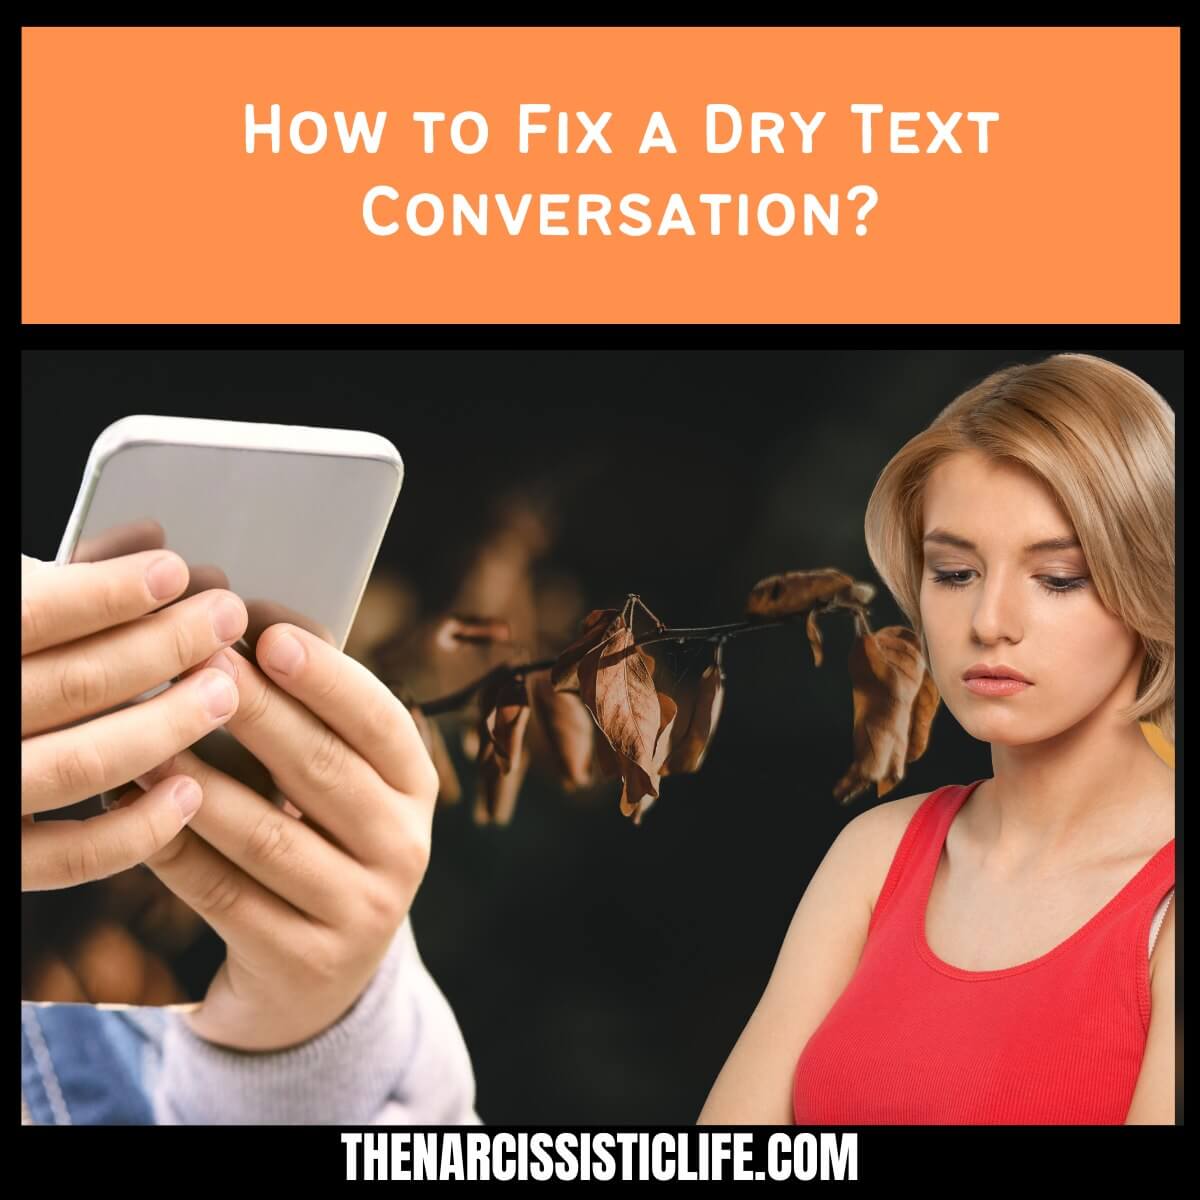 How to Fix a Dry Text Conversation